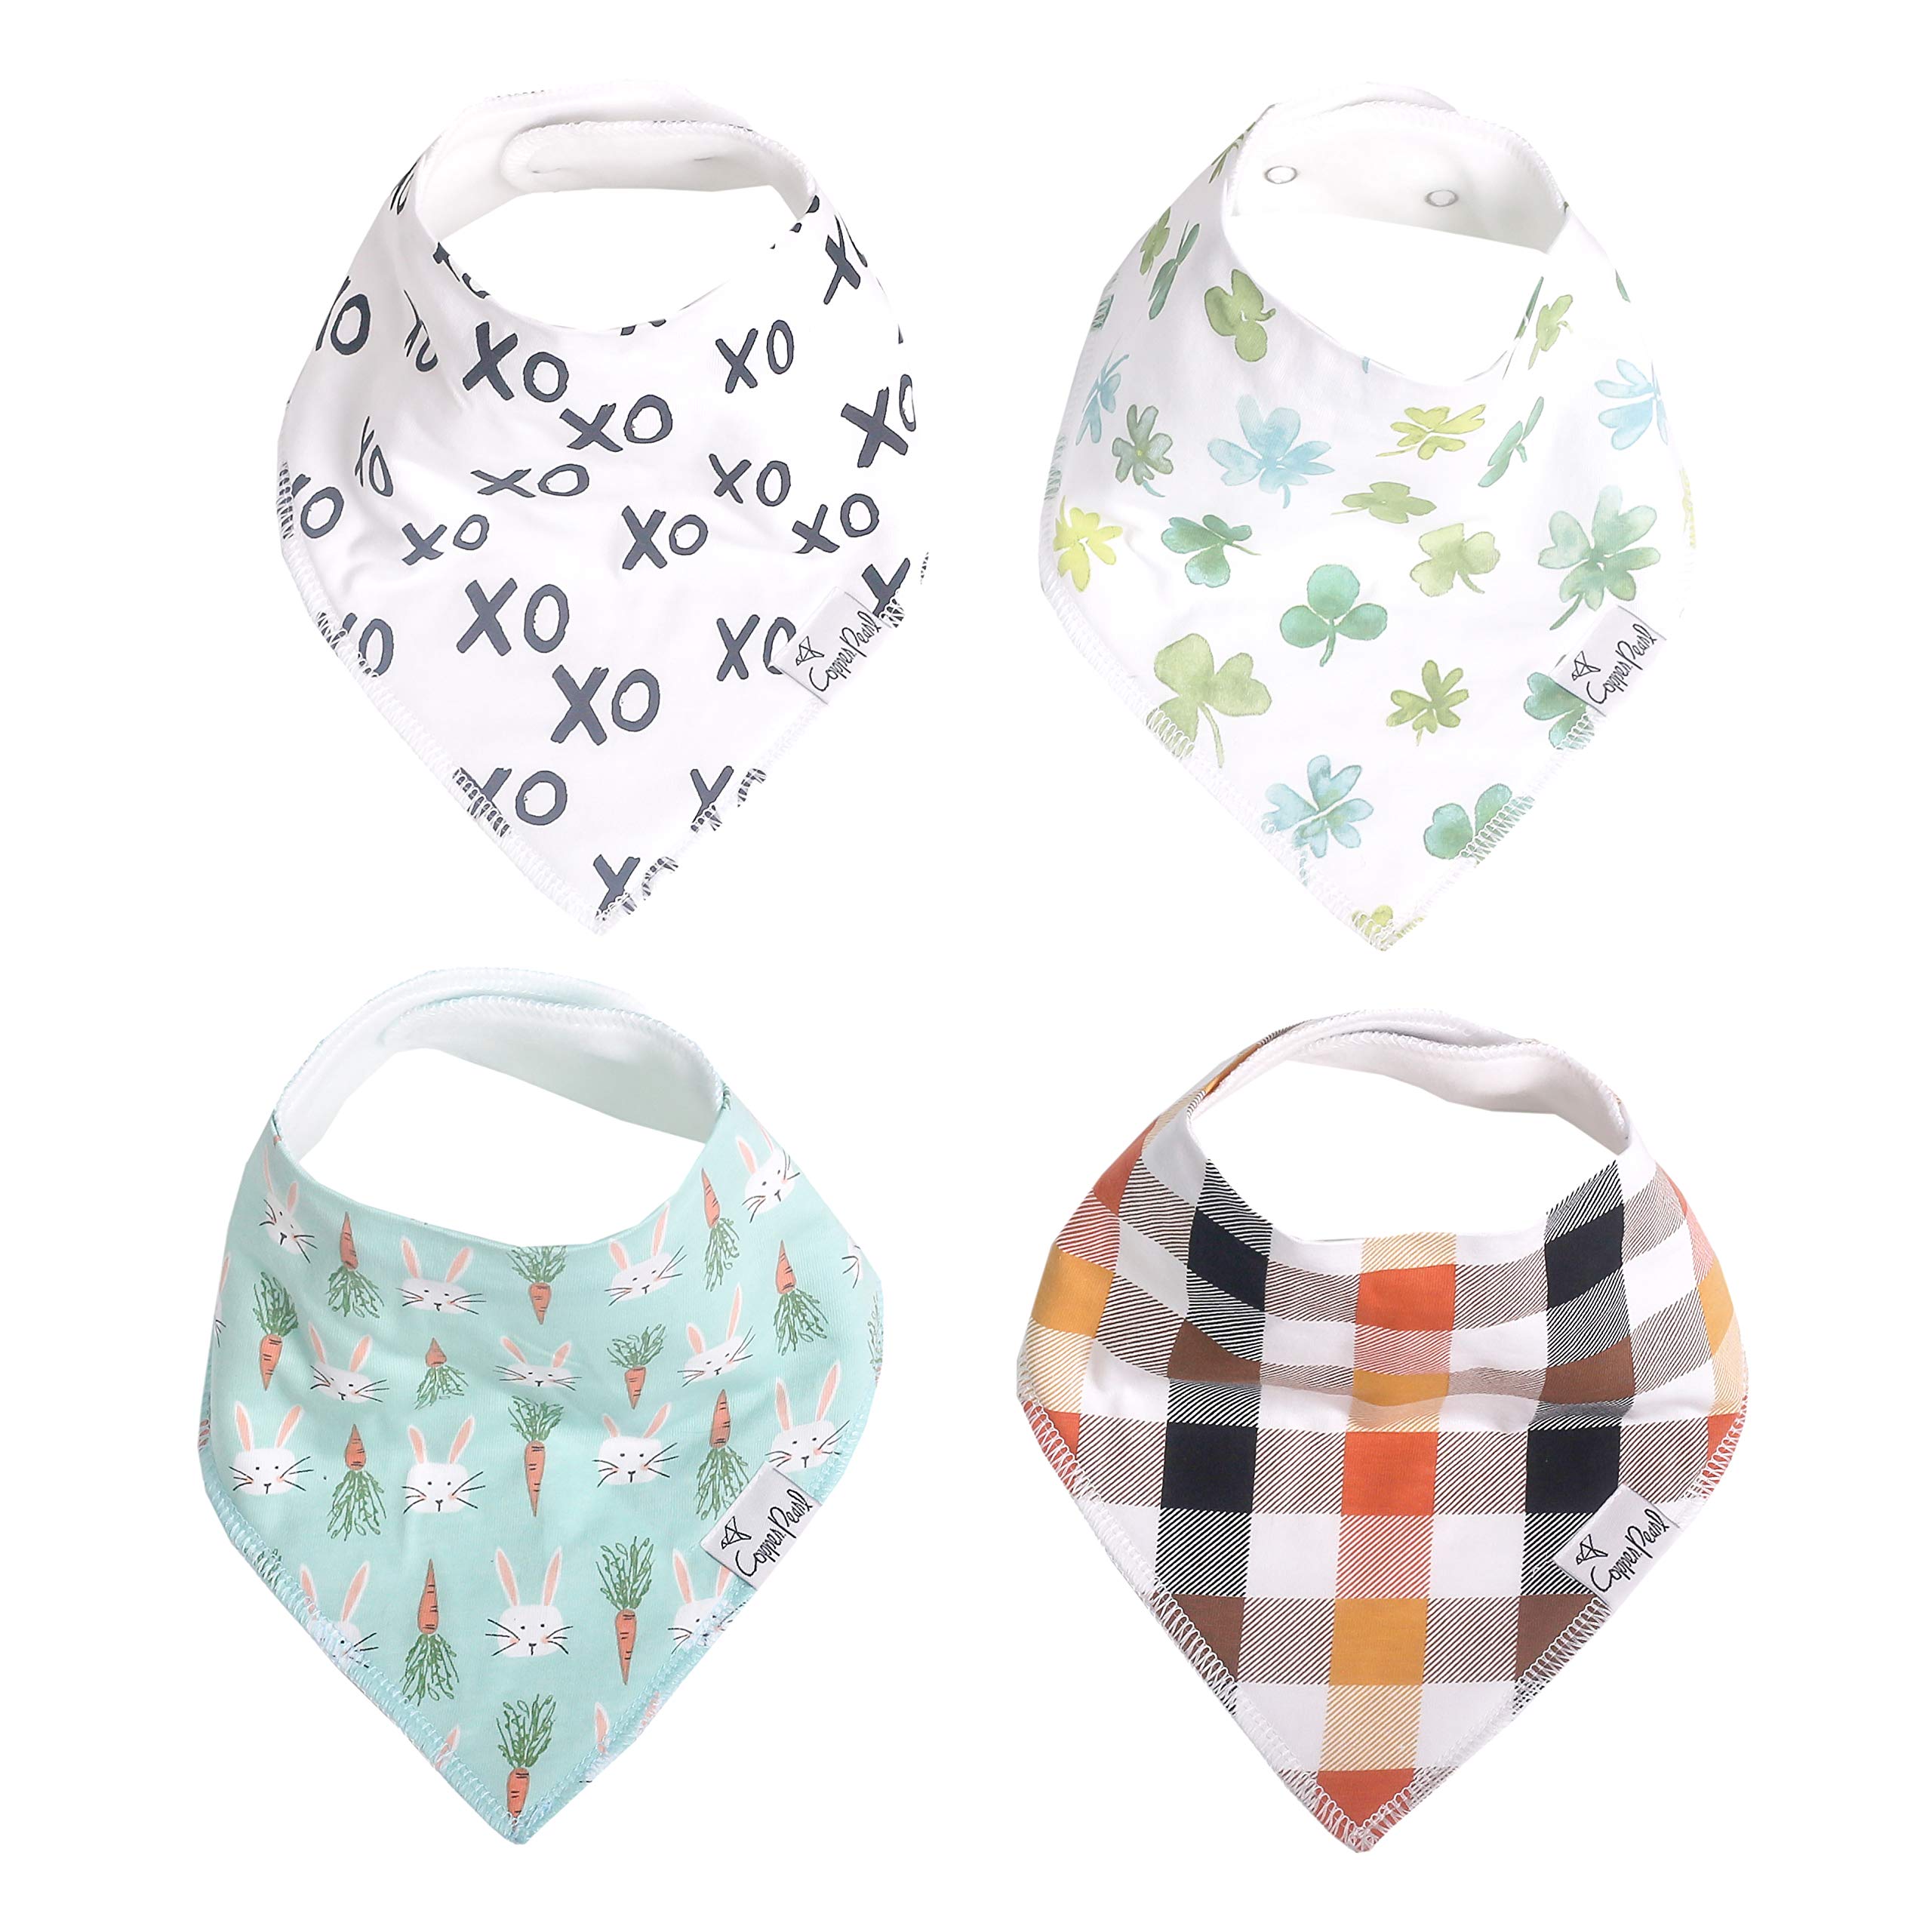 Copper Pearl Baby Bandana Drool Bibs for Drooling and Teething 4 Pack Gift Set “Holiday